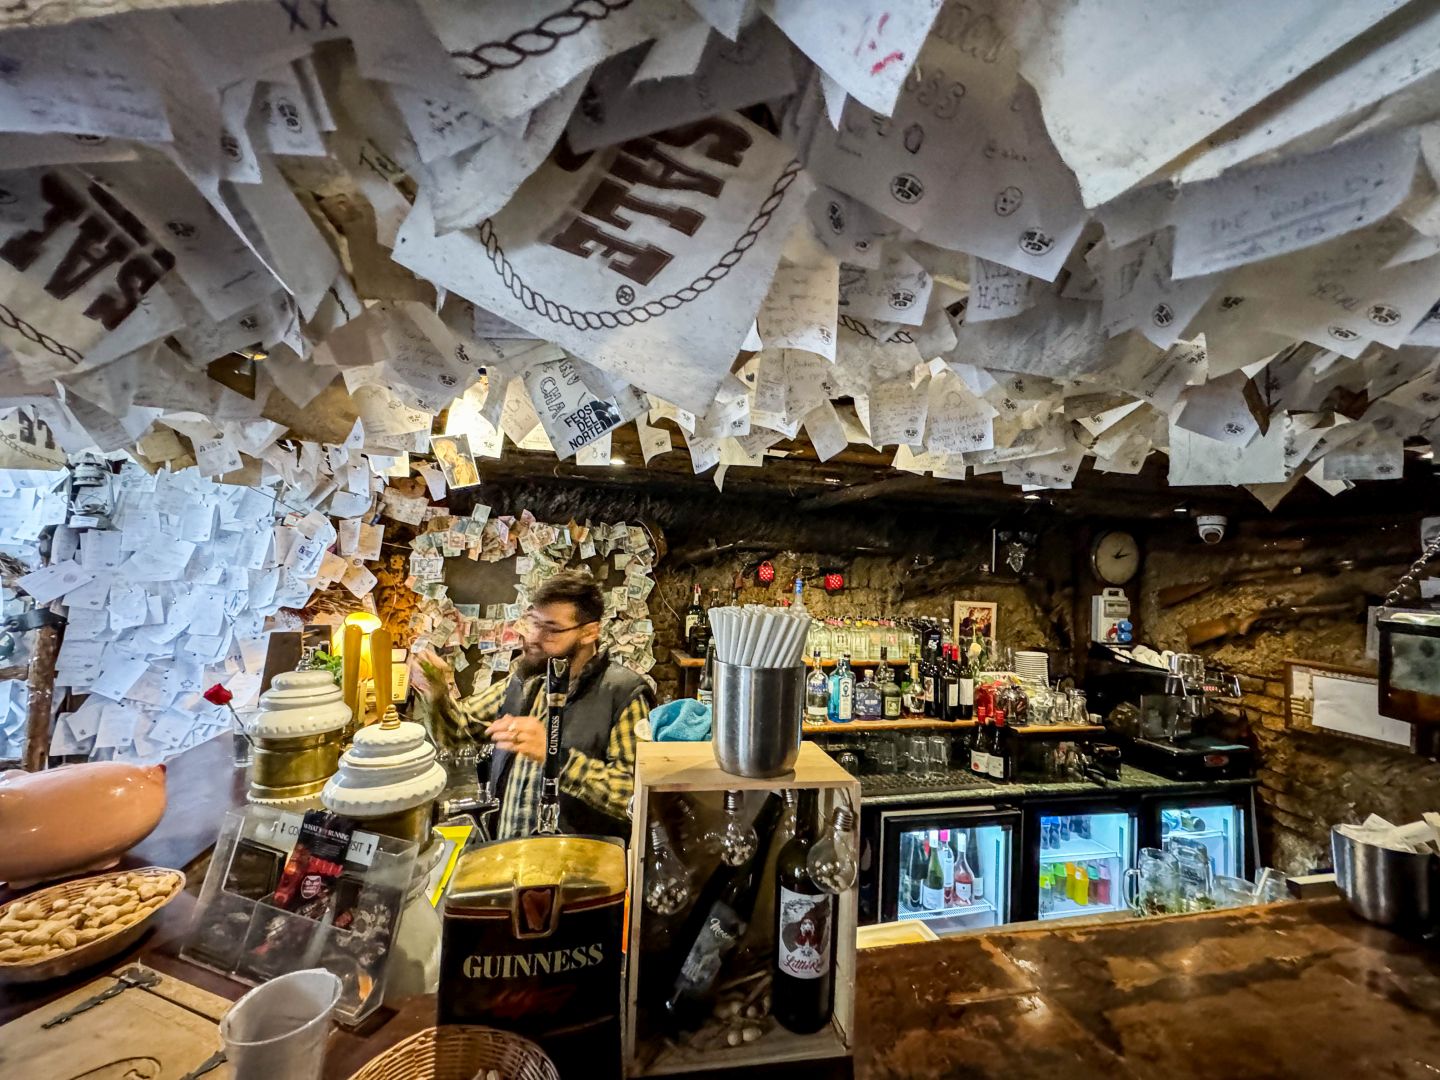 View of the bar area in the For Sale Pub covered with paper notes and flyers left behind by customers